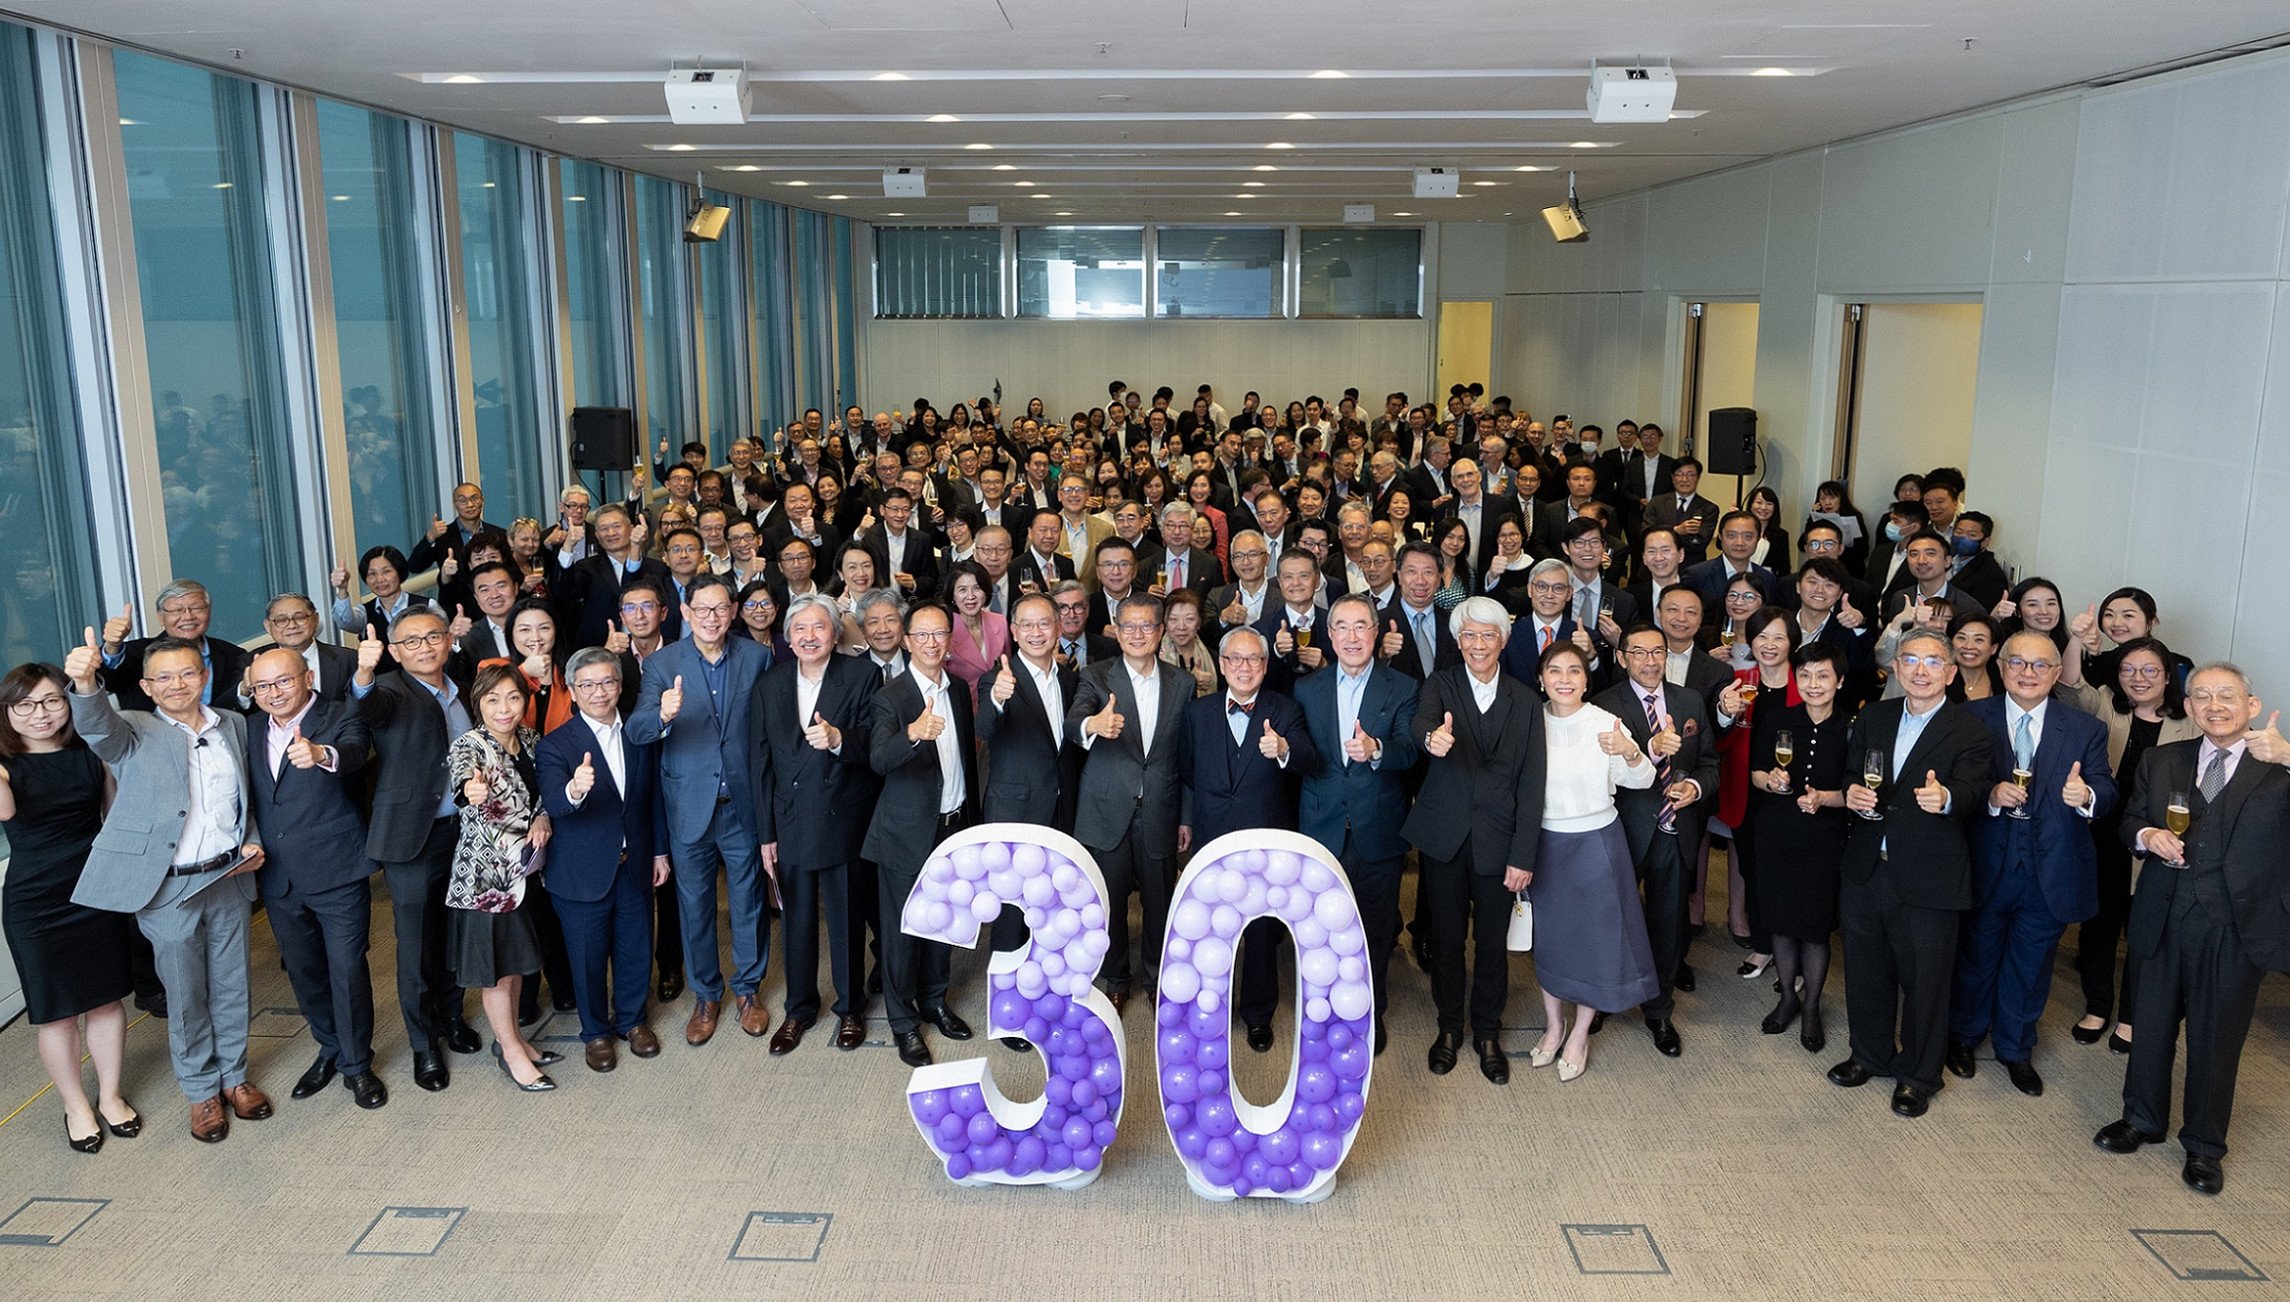 Former and current HKMA CEOs and the city’s financial secretary get together with scores of staff and key bankers to celebrate the 30th anniversary of the HKMA. Photo: Hong Kong Monetary Authority